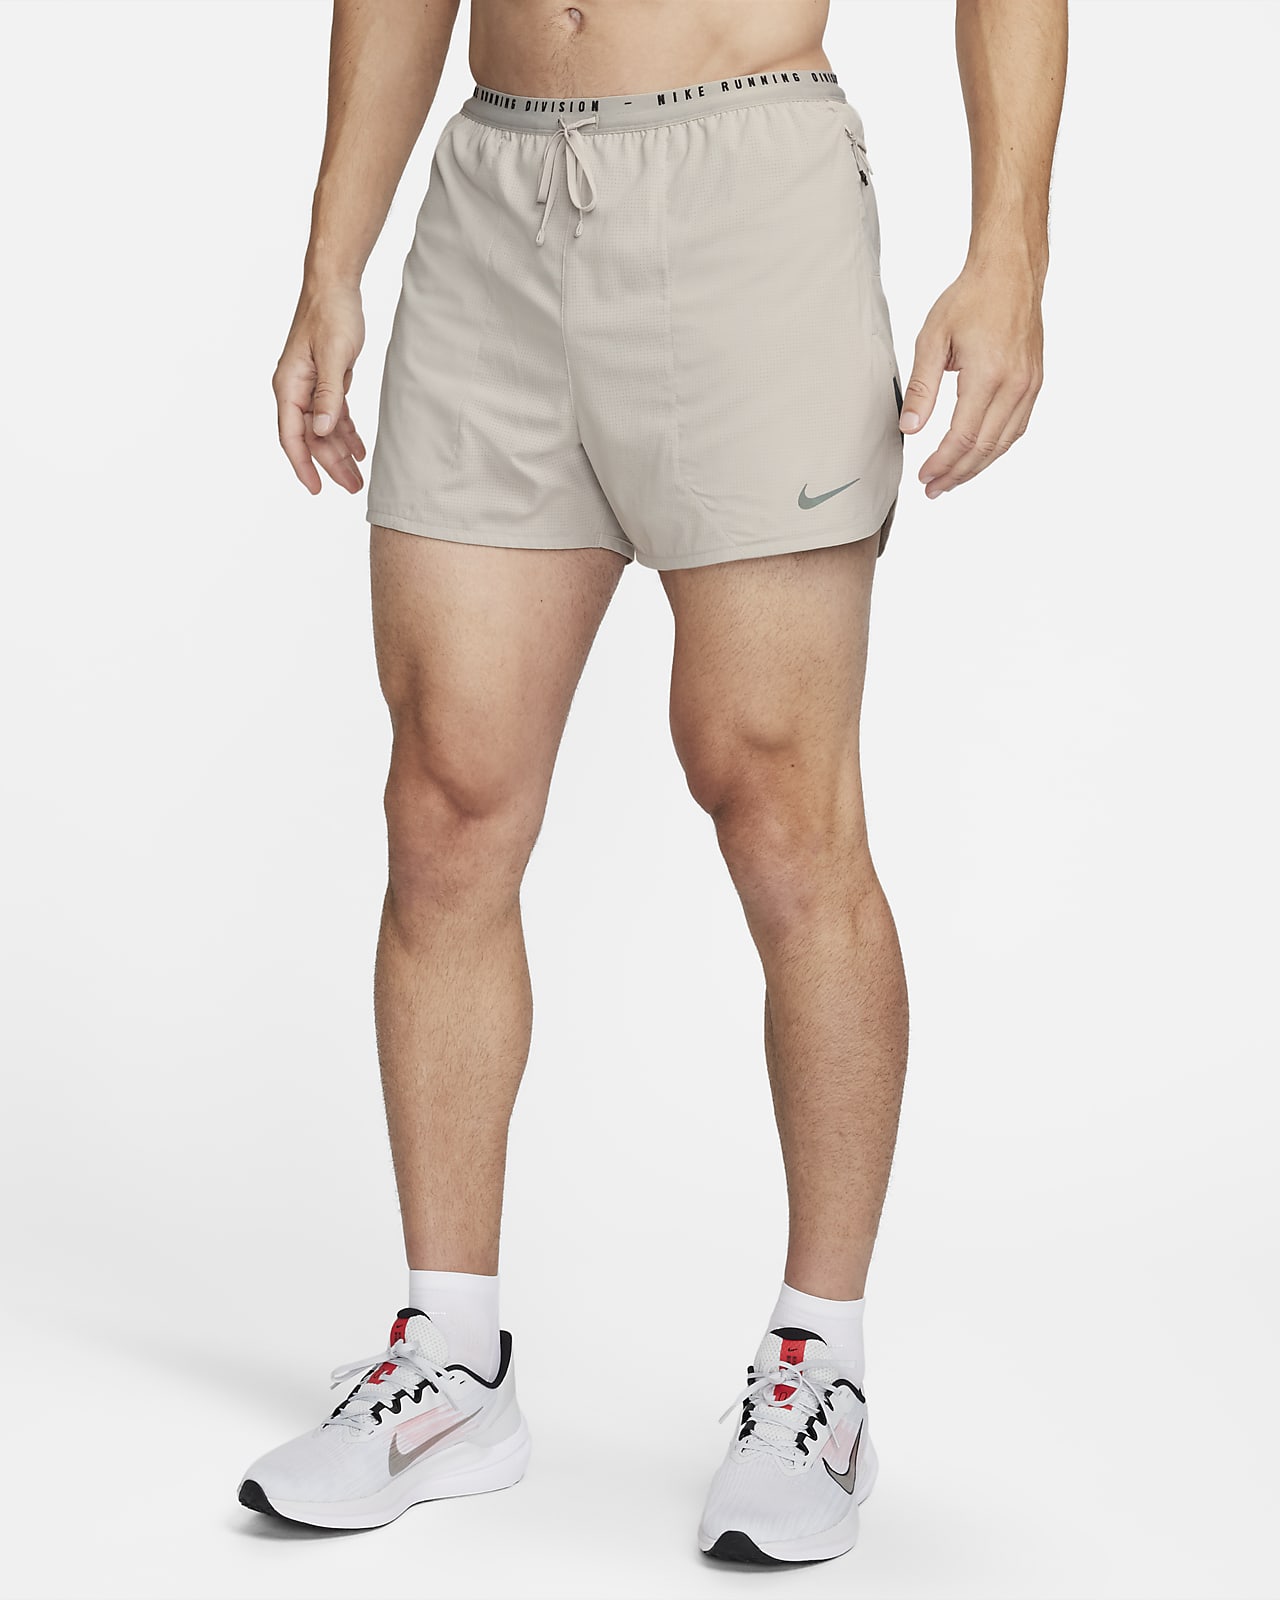 Running Shorts With a Phone Pocket: Why They're So Convenient. Nike IN